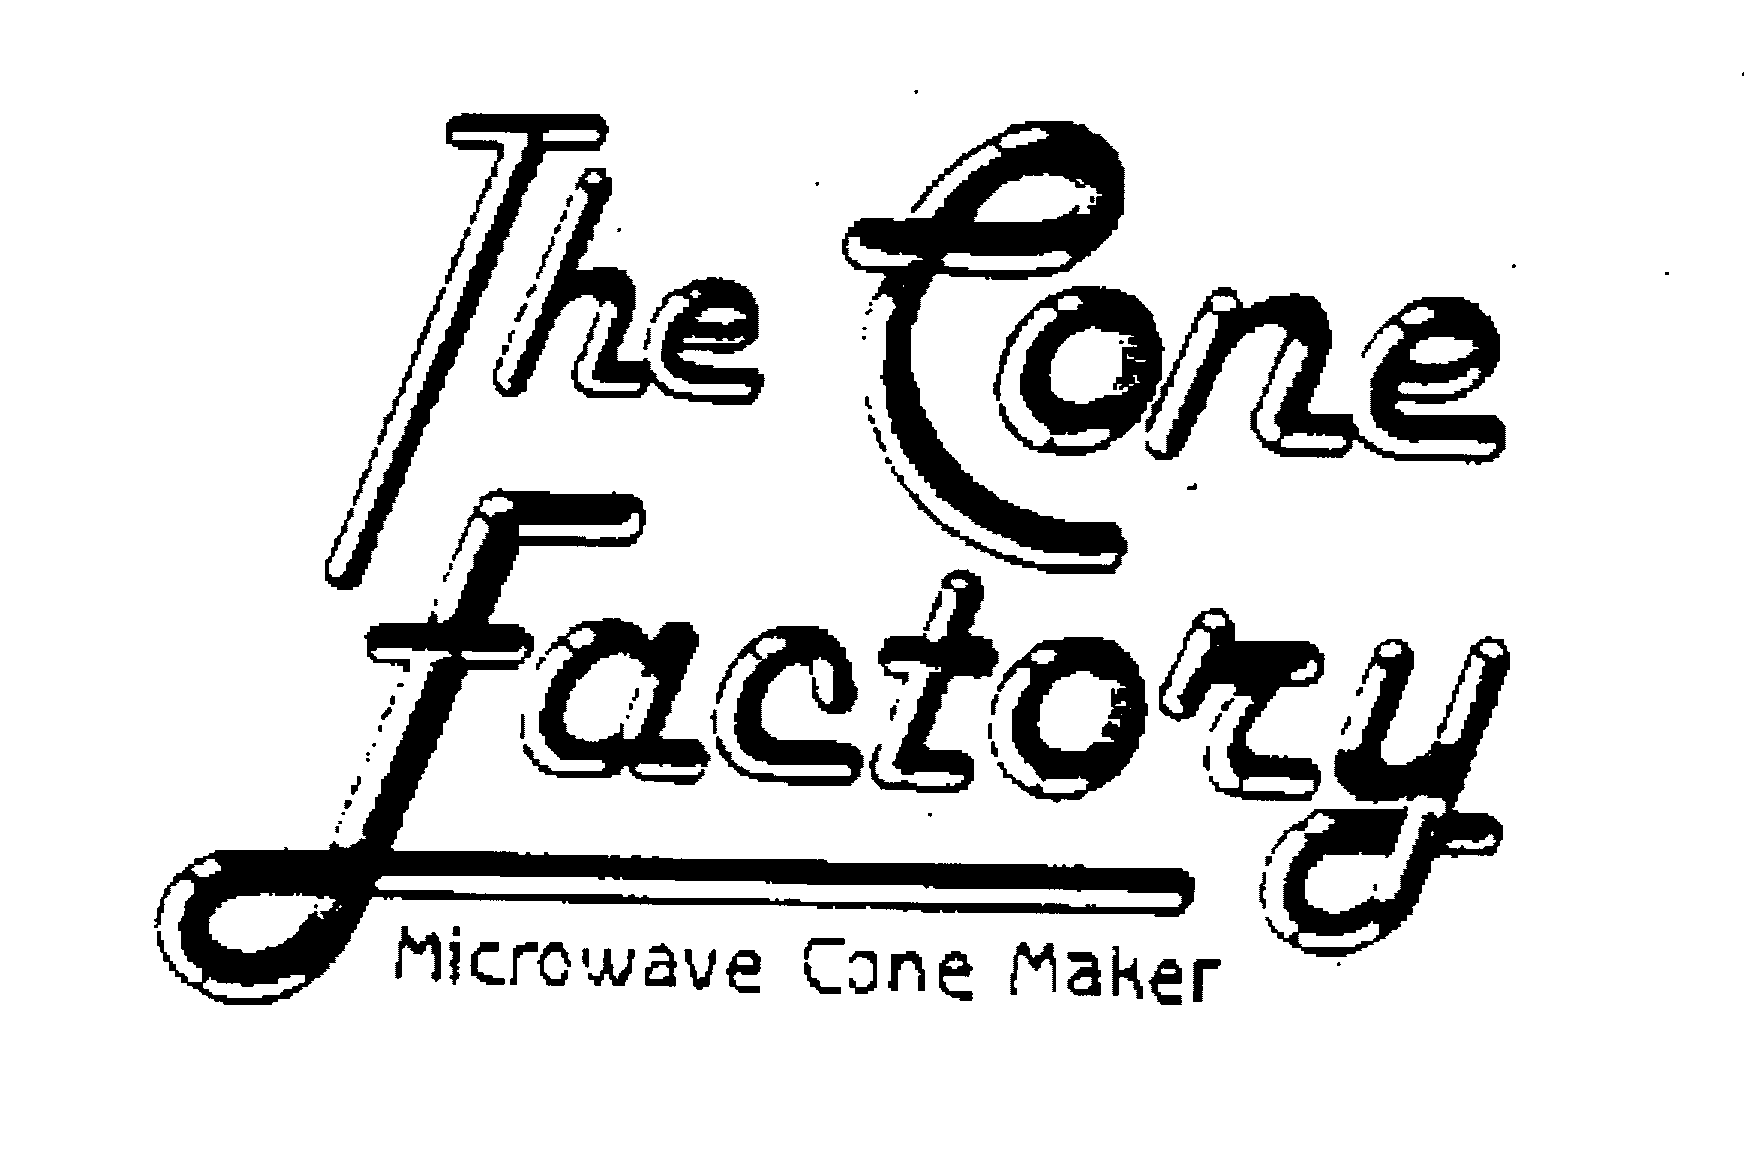  THE CONE FACTORY MICROWAVE CONE MAKER